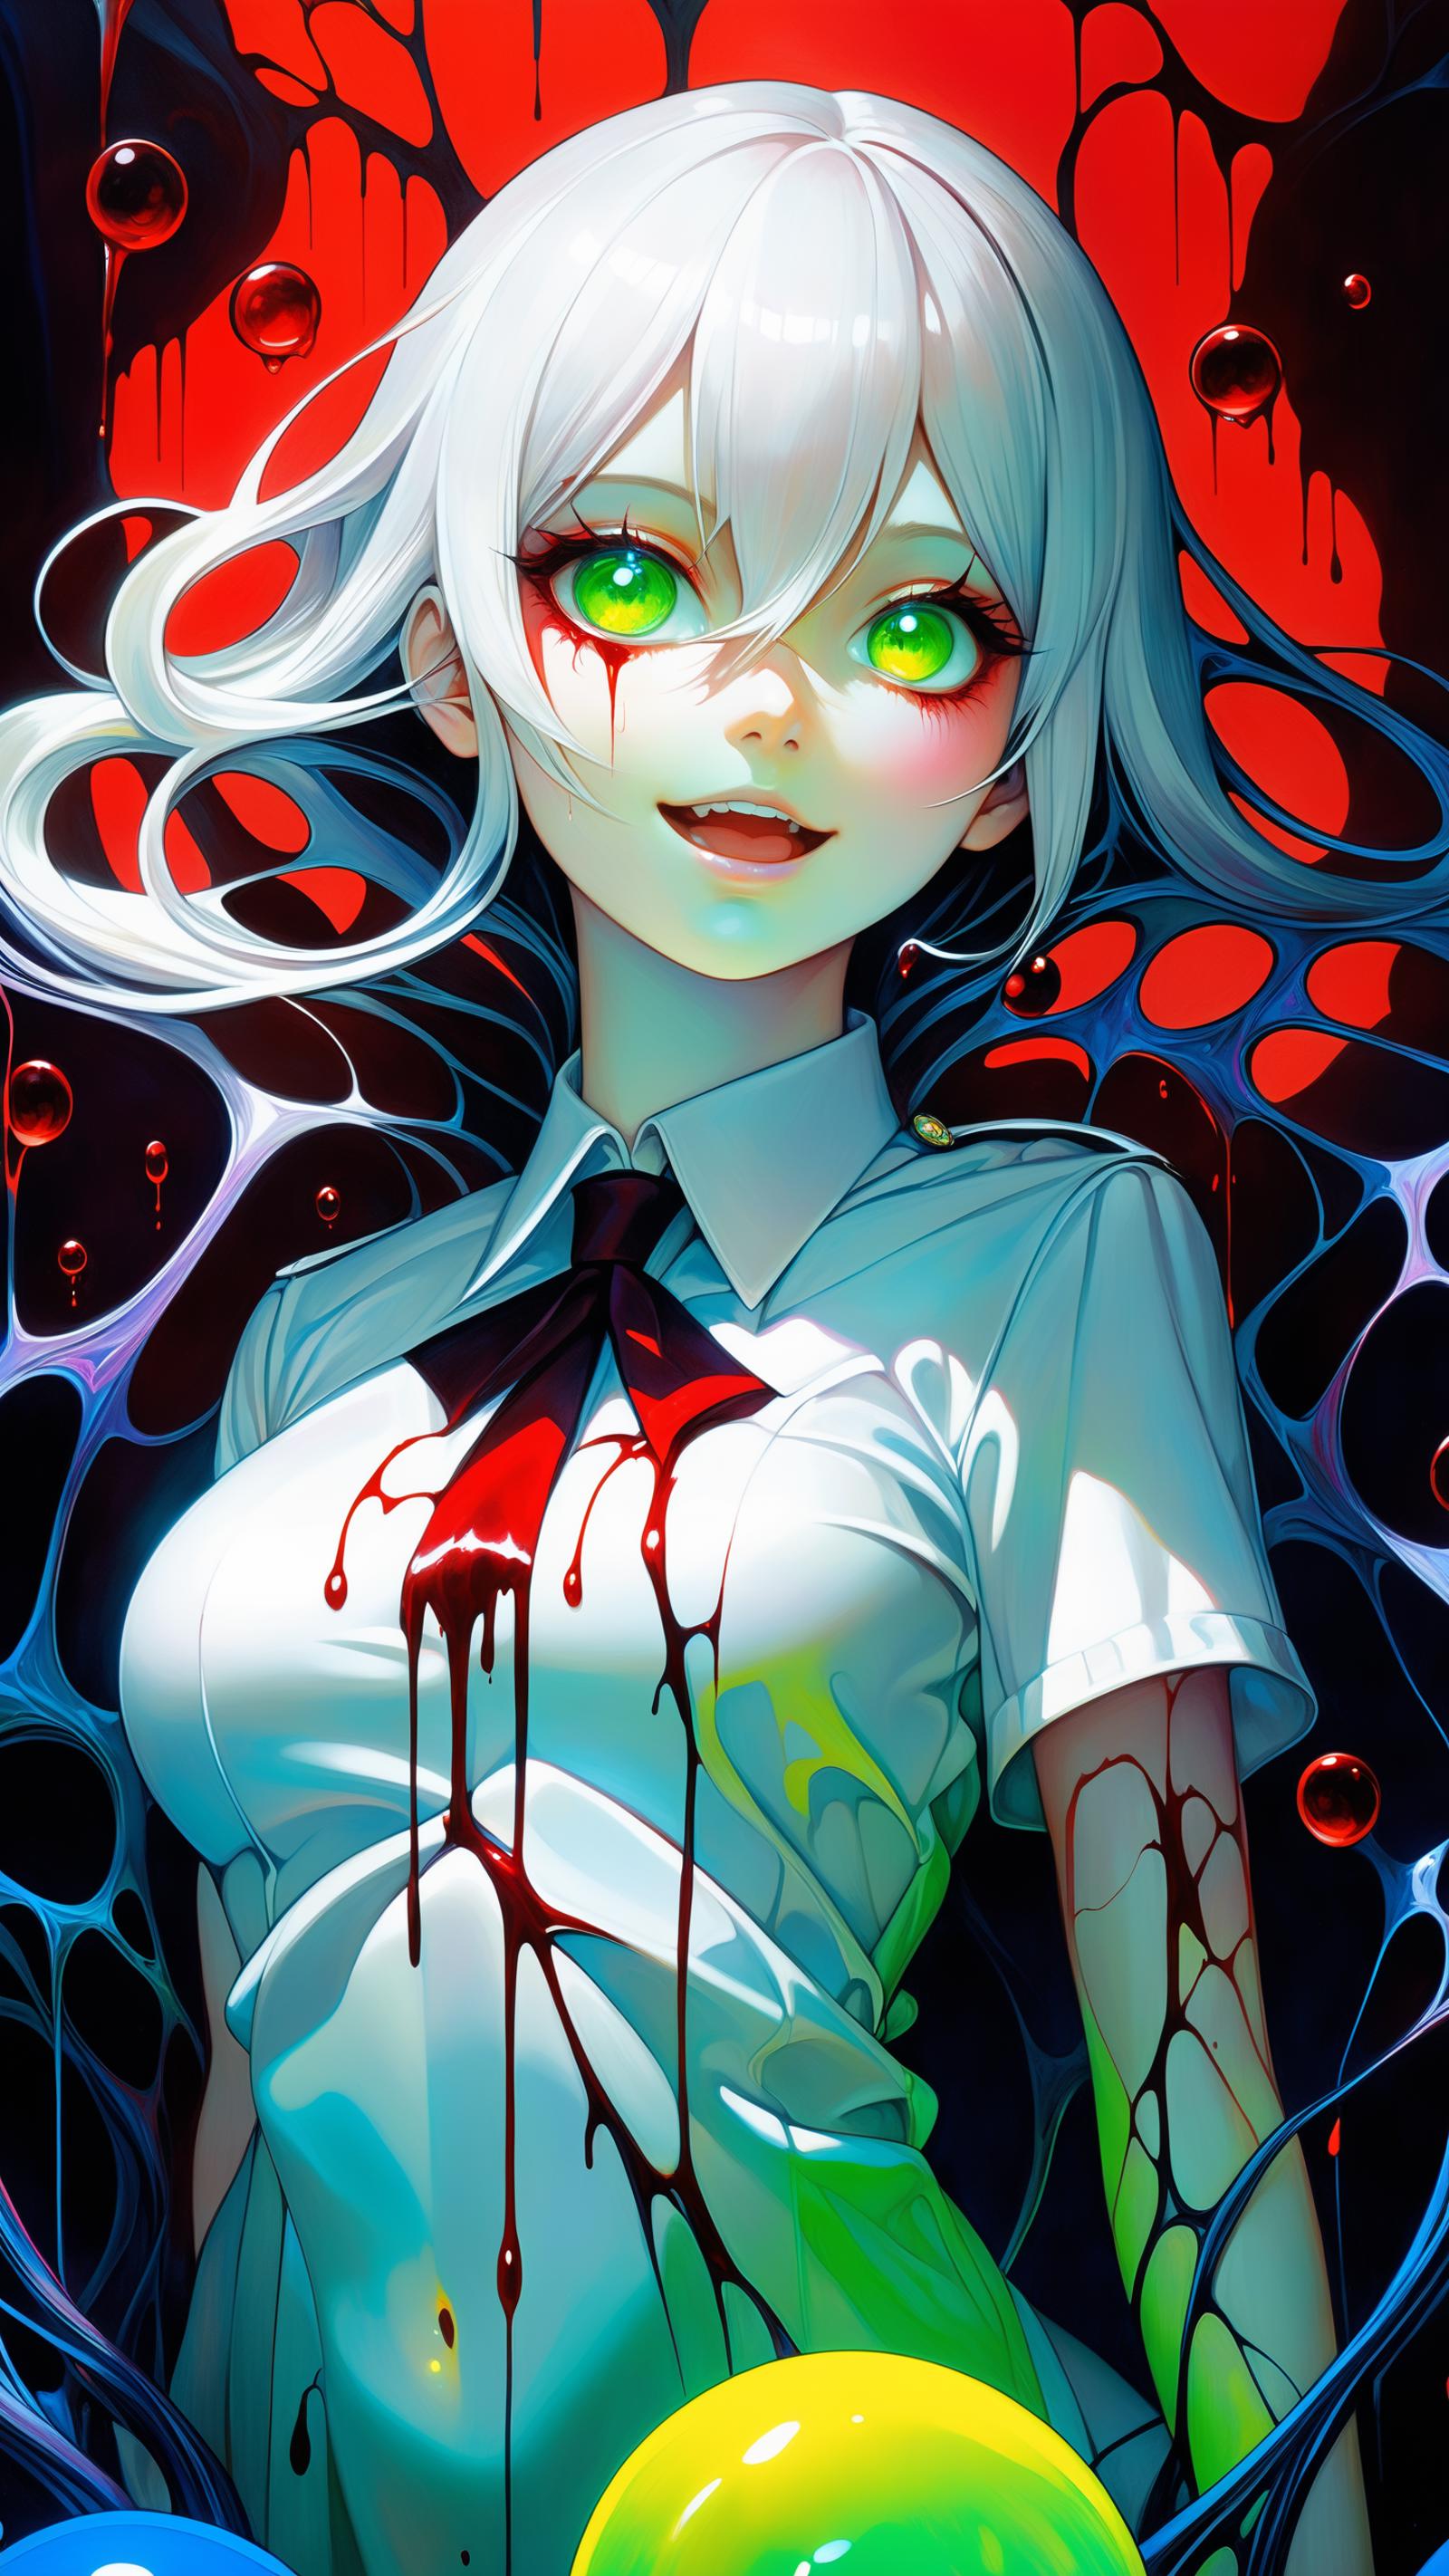 A woman with green eyes and a black tie is dripping blood and surrounded by spiderwebs.